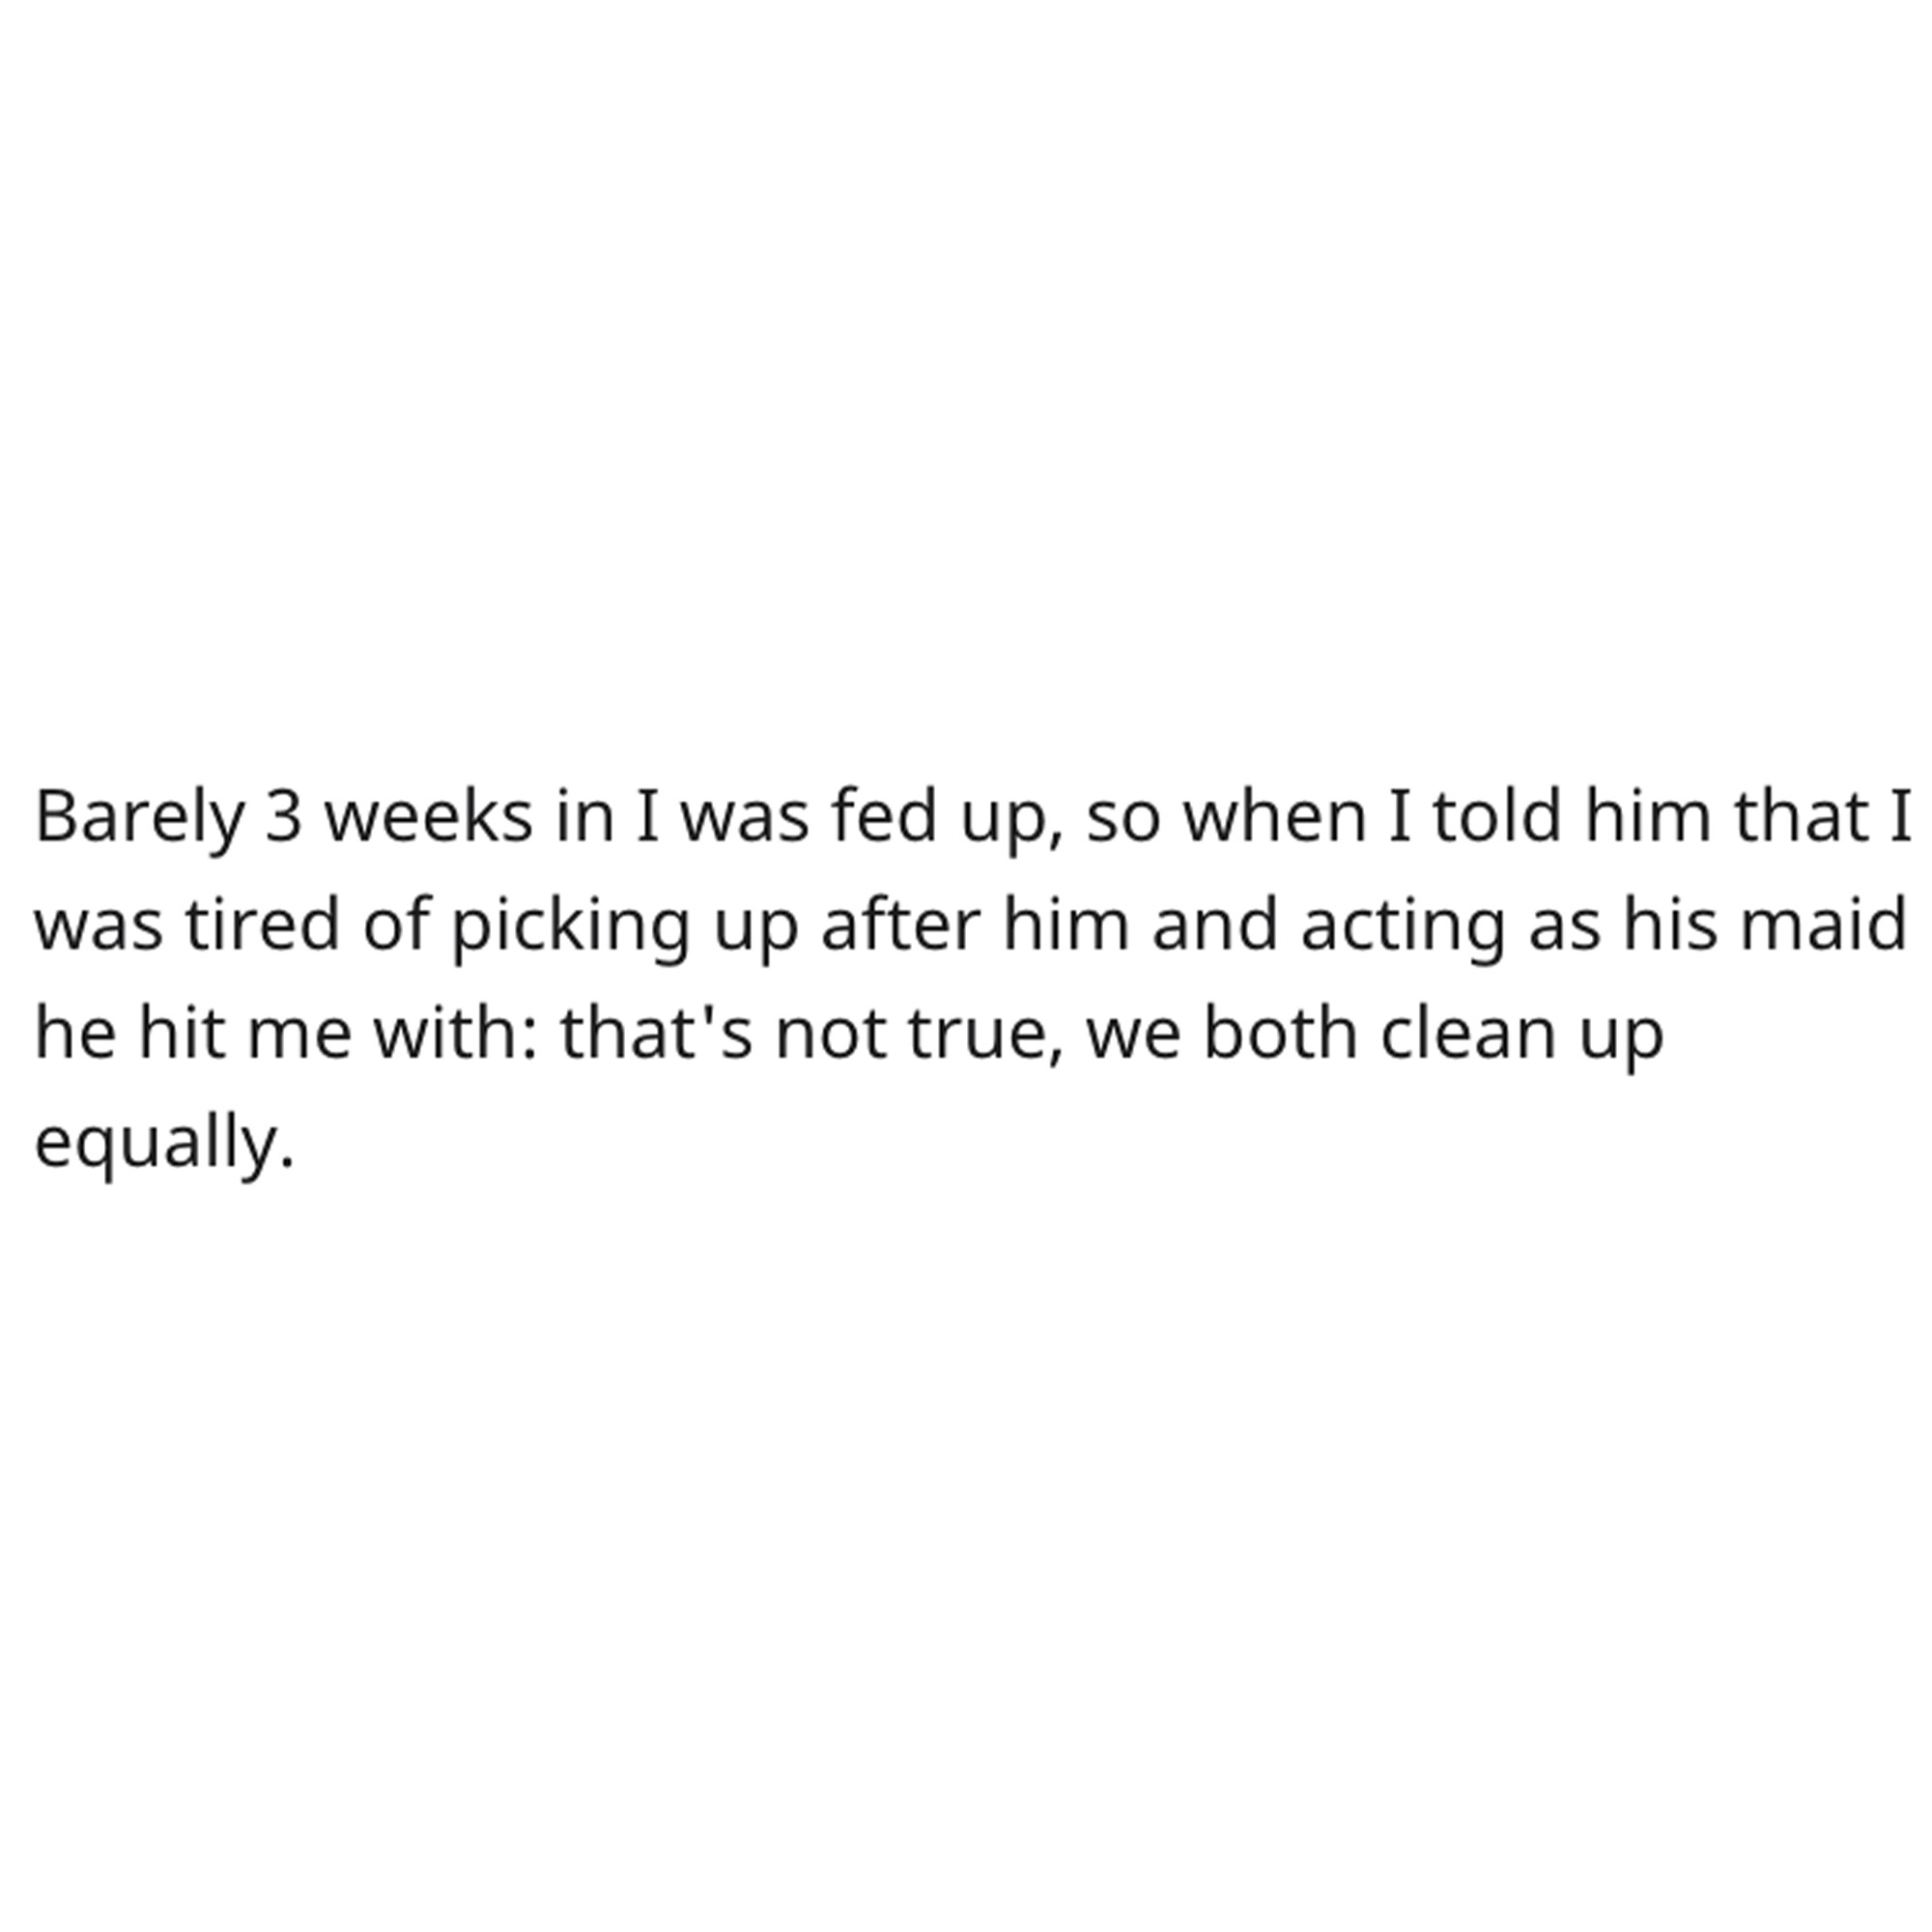 Cleaning Contest Reddit Story - angle - Barely 3 weeks in I was fed up, so when I told him that I was tired of picking up after him and acting as his maid he hit me with that's not true, we both clean up equally.